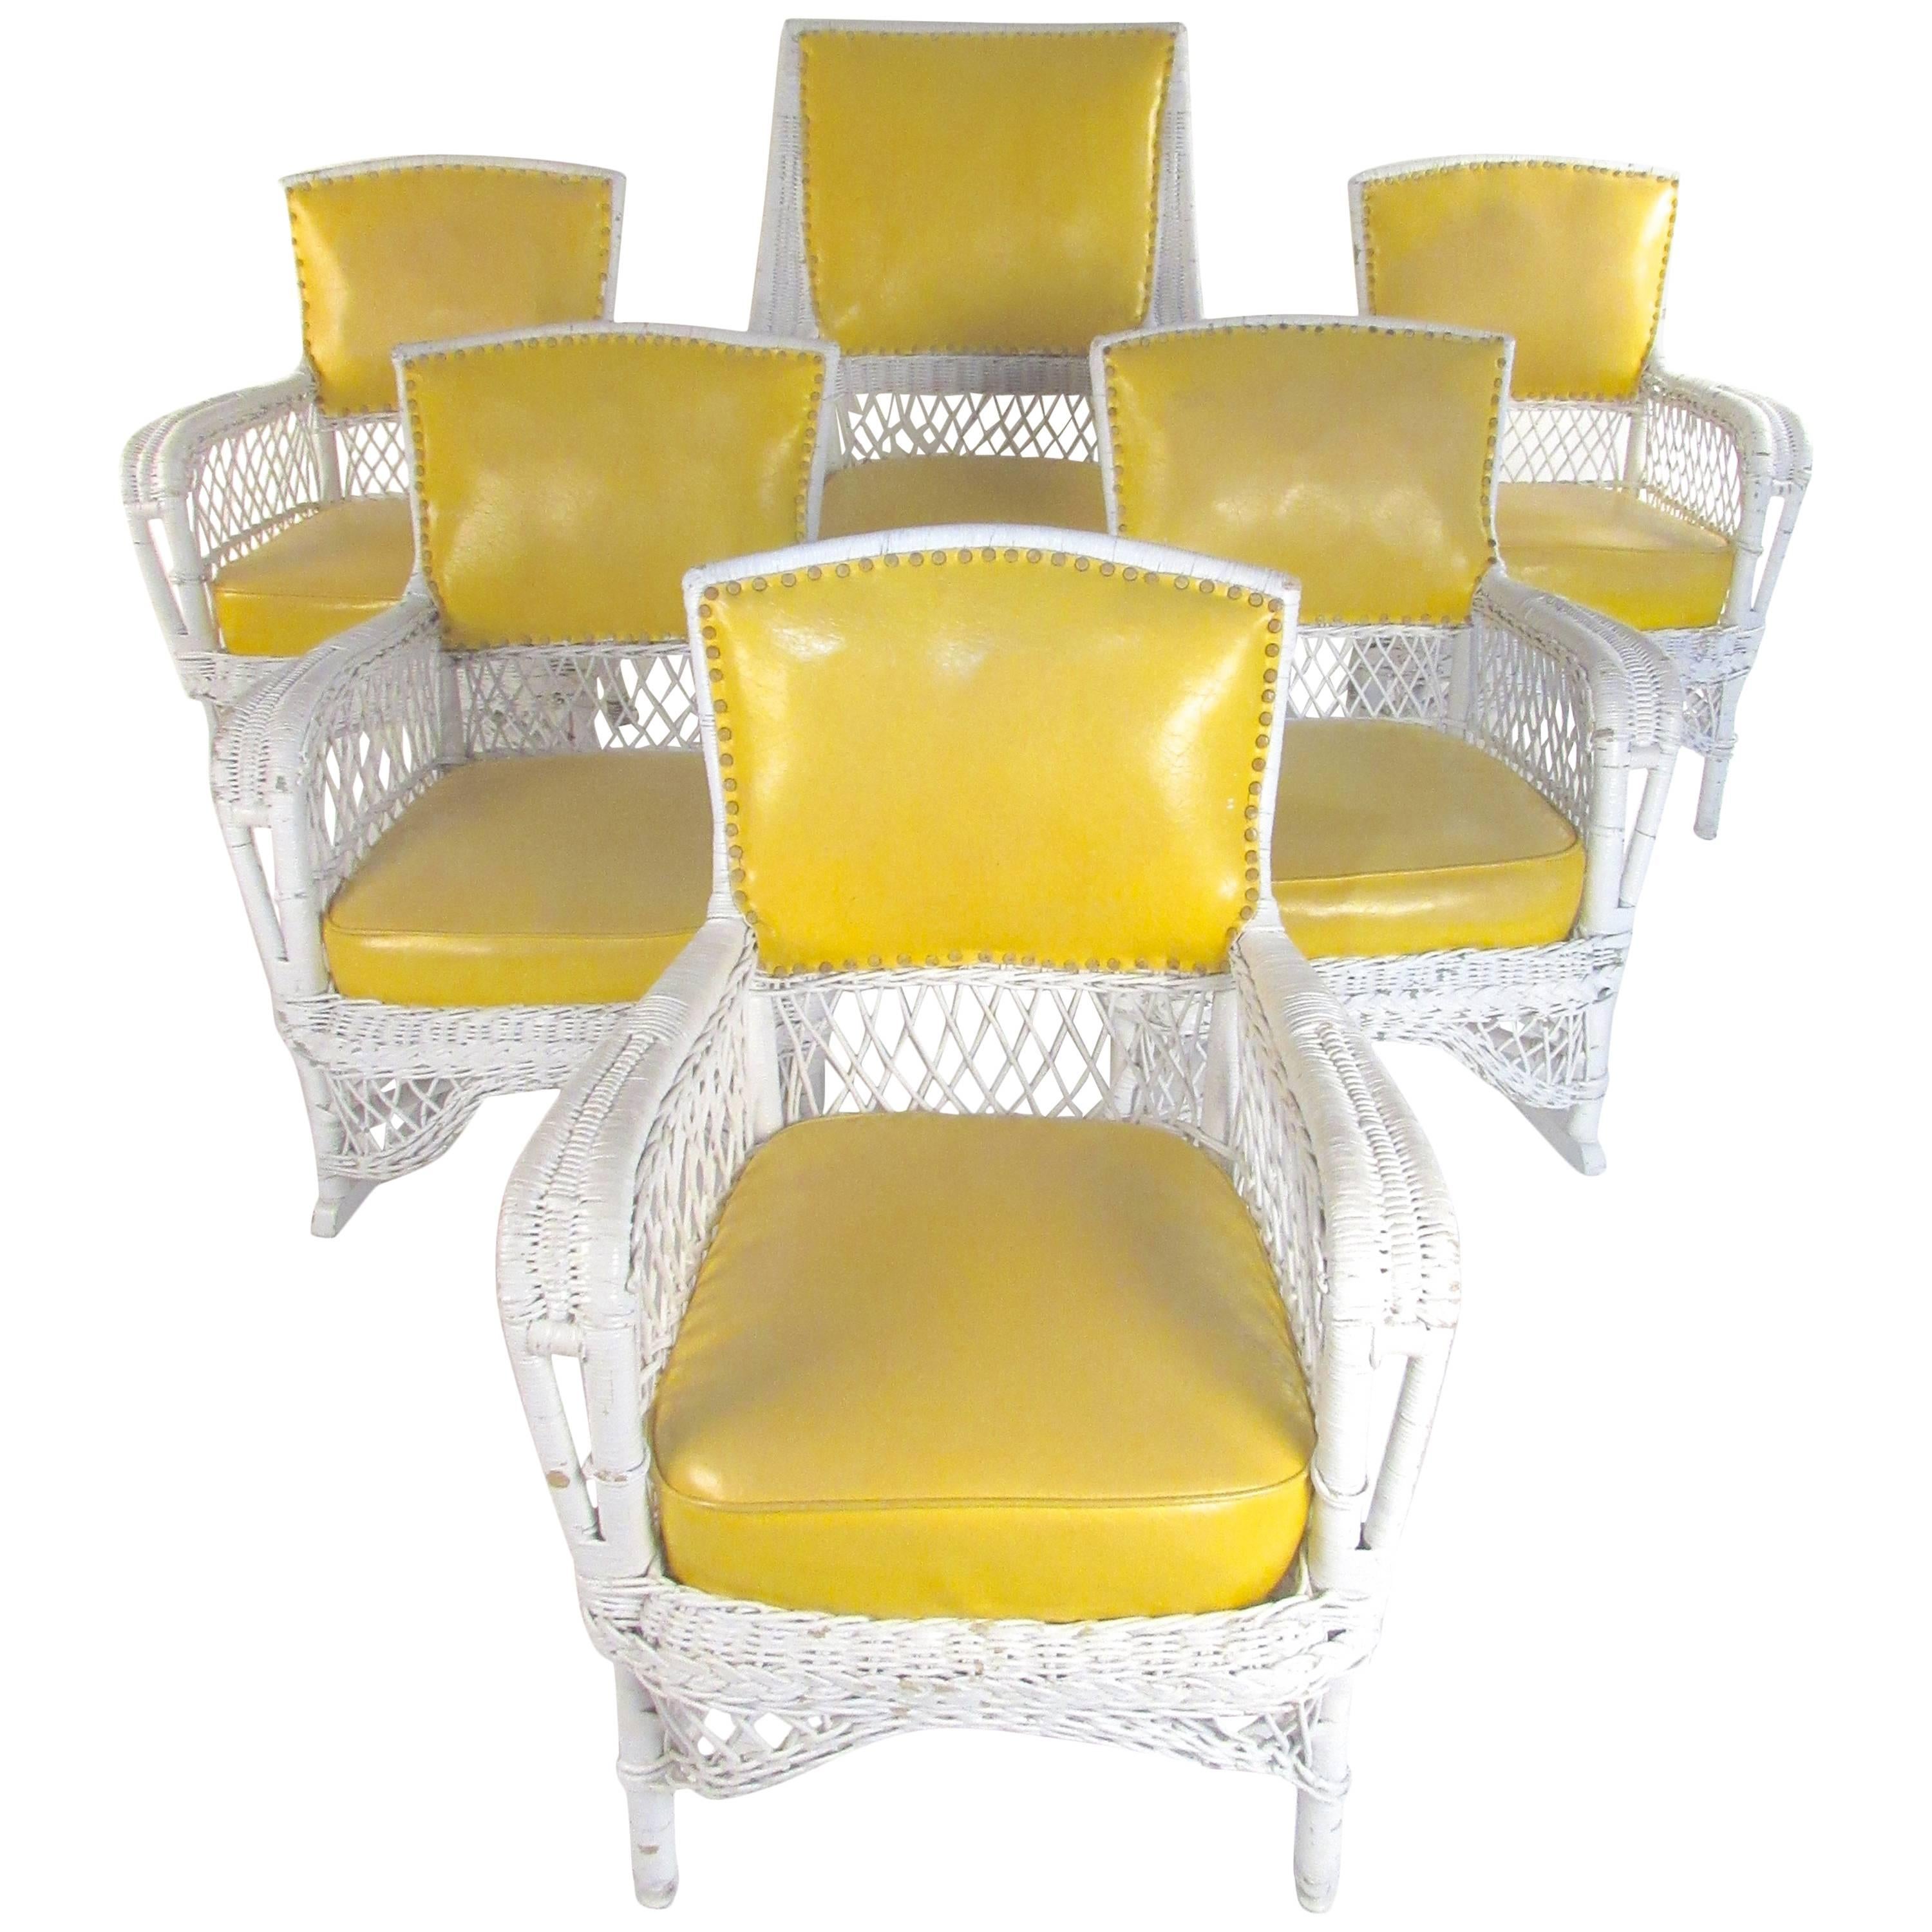 Set of Six Vintage Wicker and Vinyl Chairs, Mid-Century Modern Patio Seating